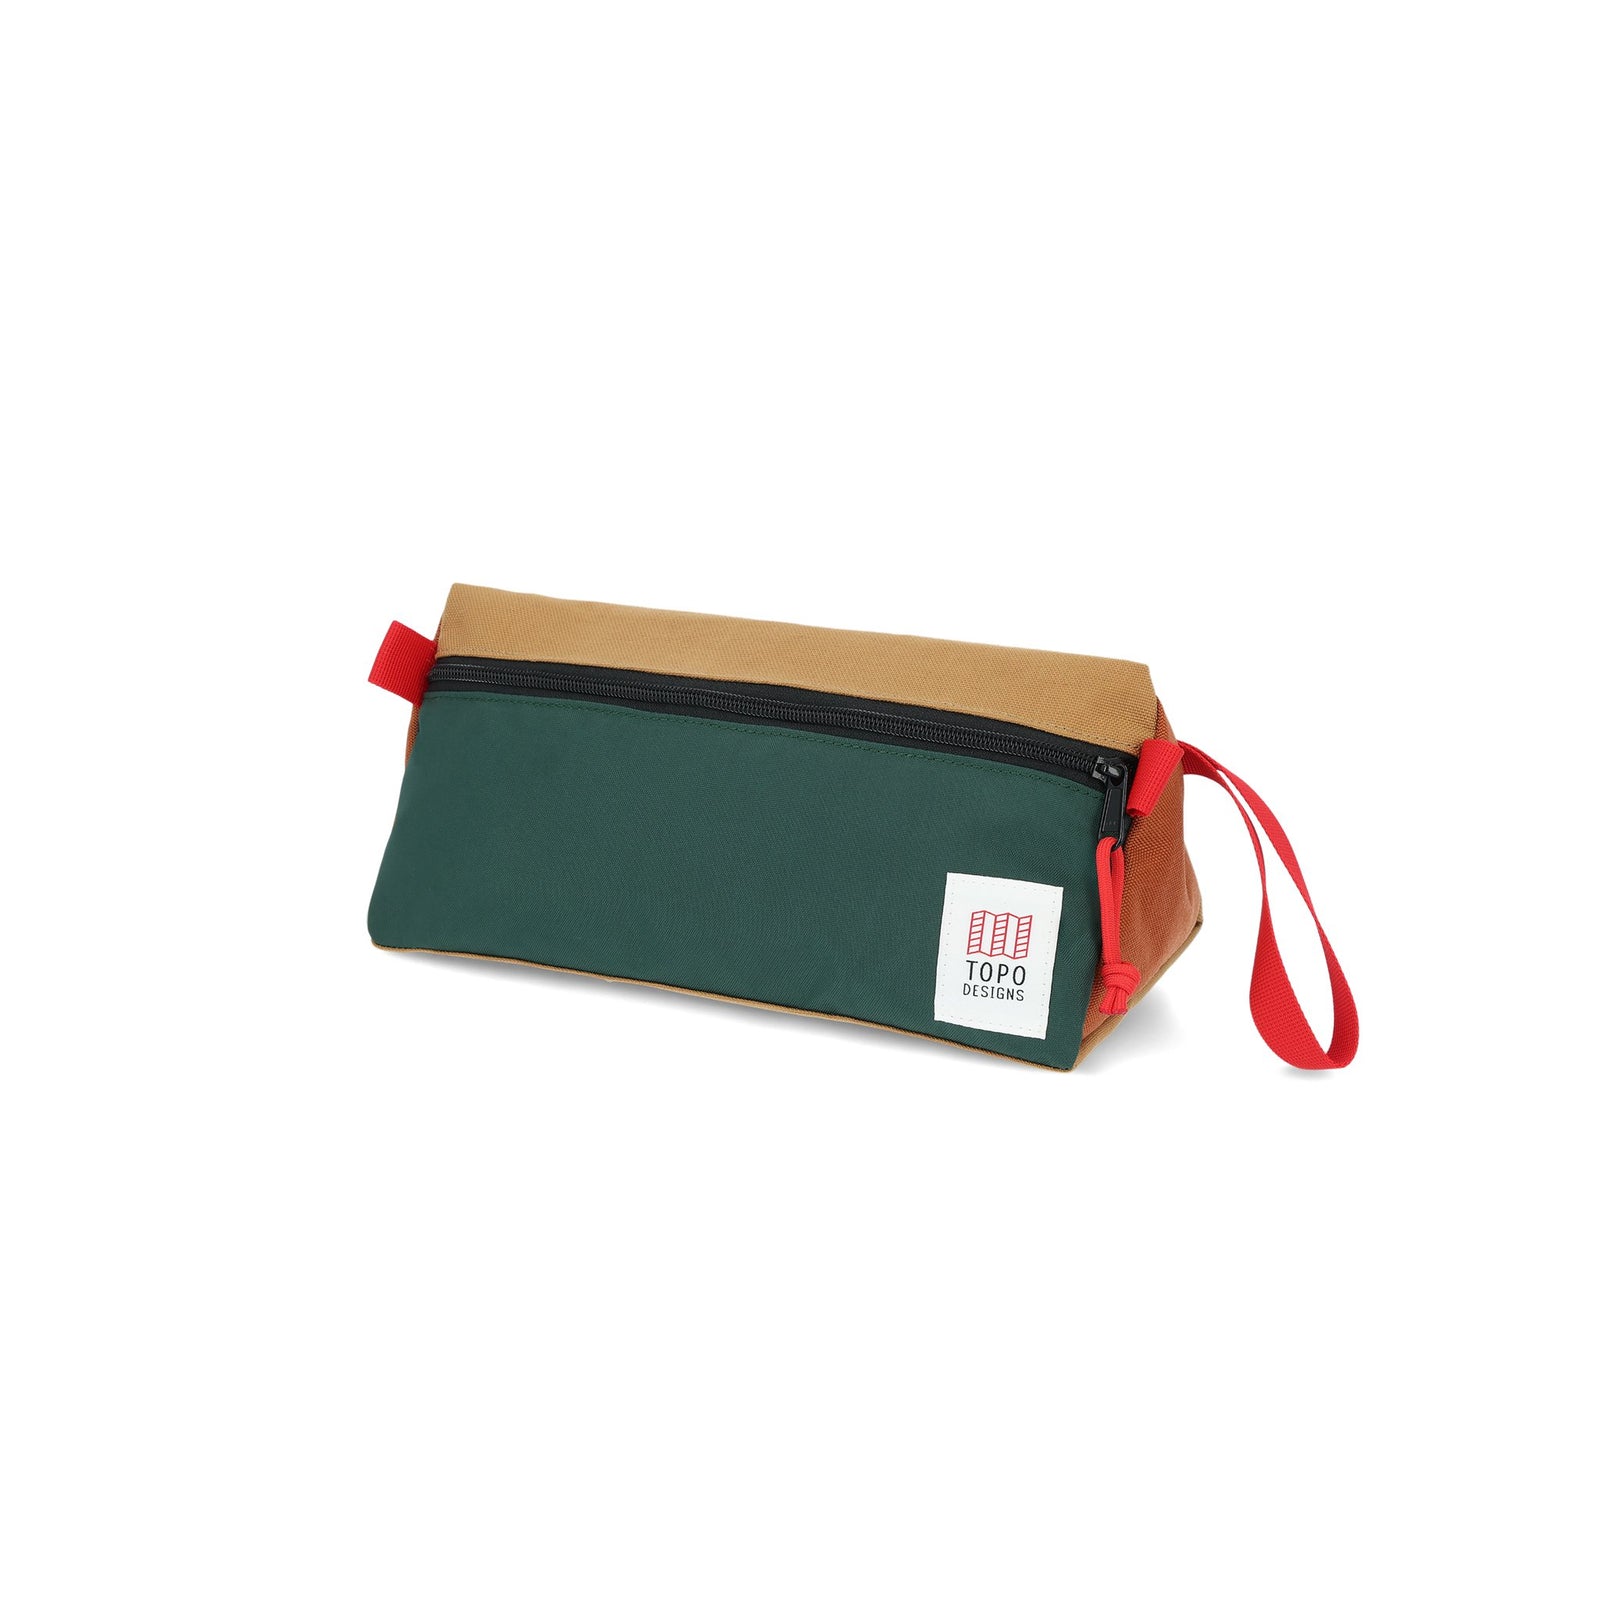 Topo Designs Dopp Kit toiletry travel bag in 100% recycled nylon "Forest / Khaki - Recycled" green brown.